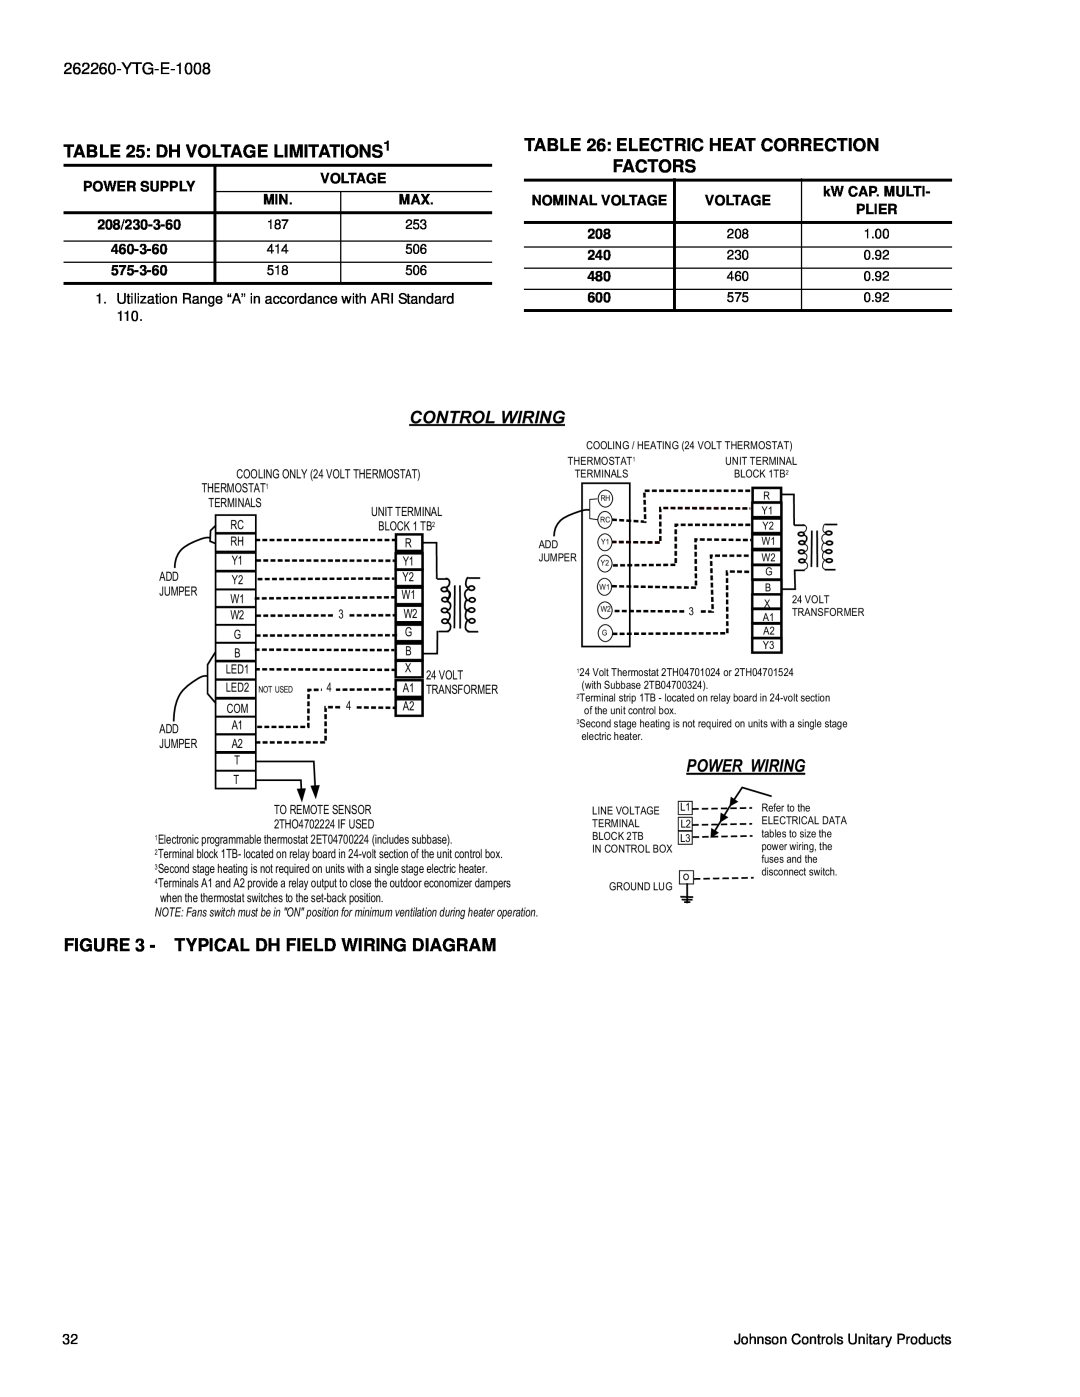 York DH 210, DH 180, DH 300 DH VOLTAGE LIMITATIONS1, Electric Heat Correction Factors, Typical Dh Field Wiring Diagram 